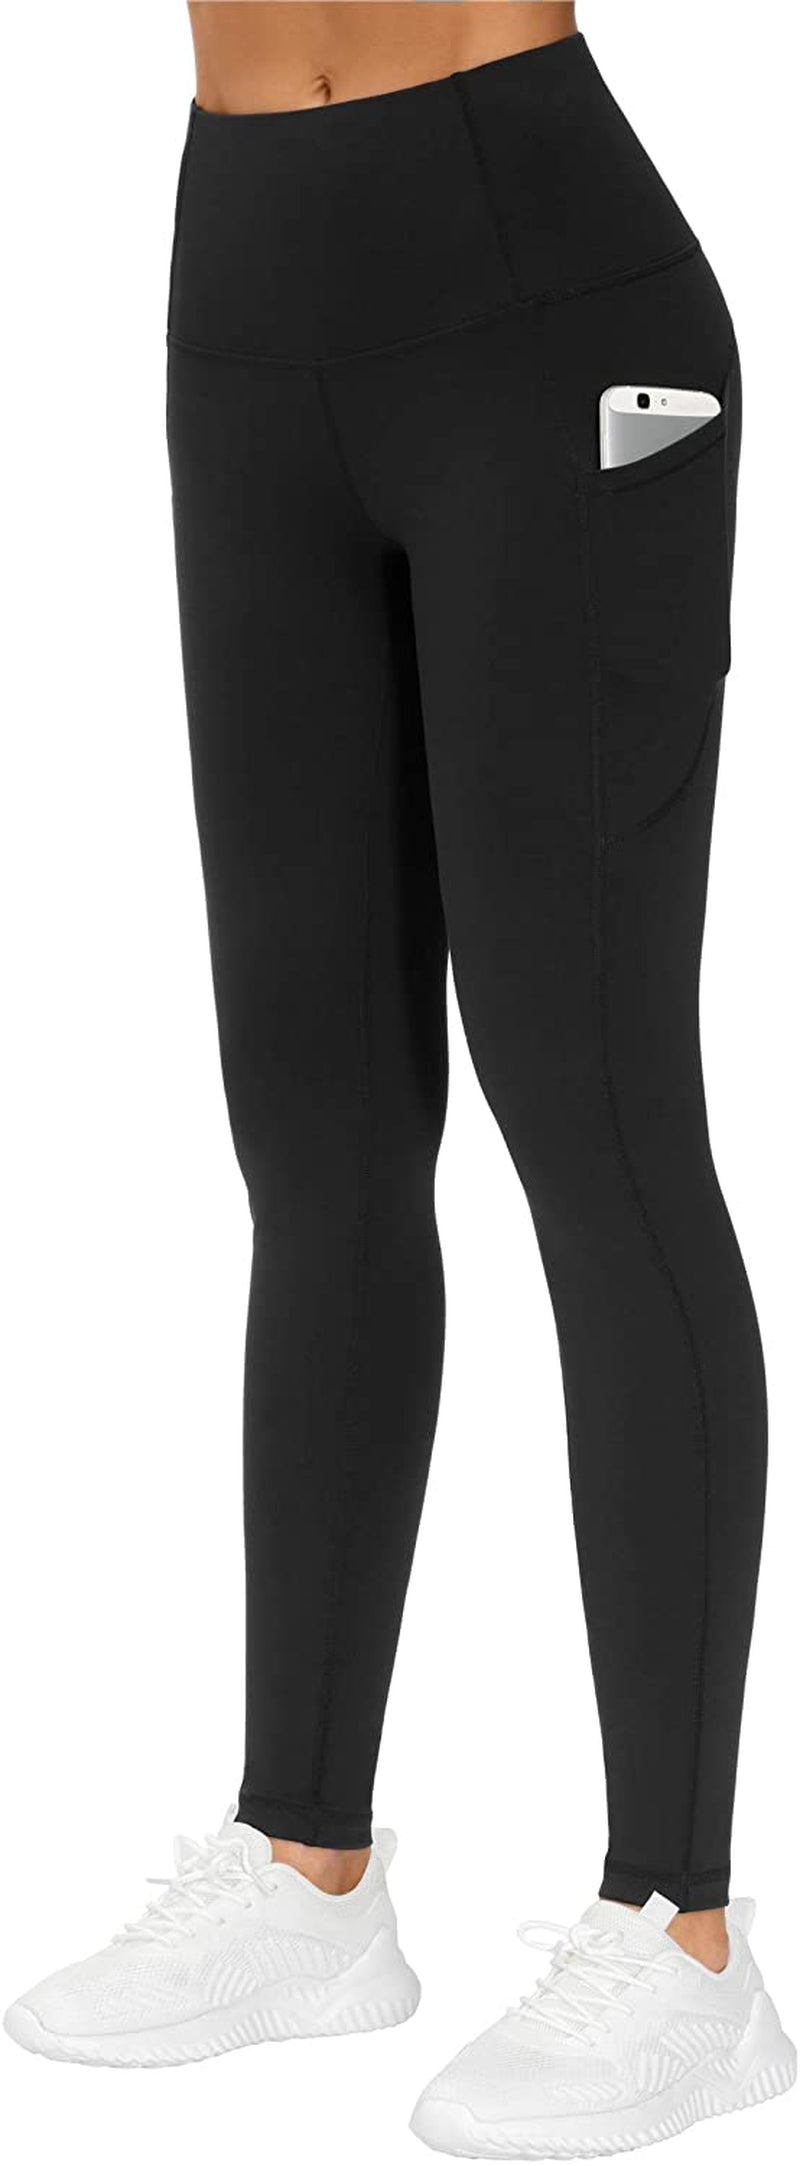 Thick High Waist Yoga Pants with Pockets, Tummy Control Workout Running Yoga Leggings for Women